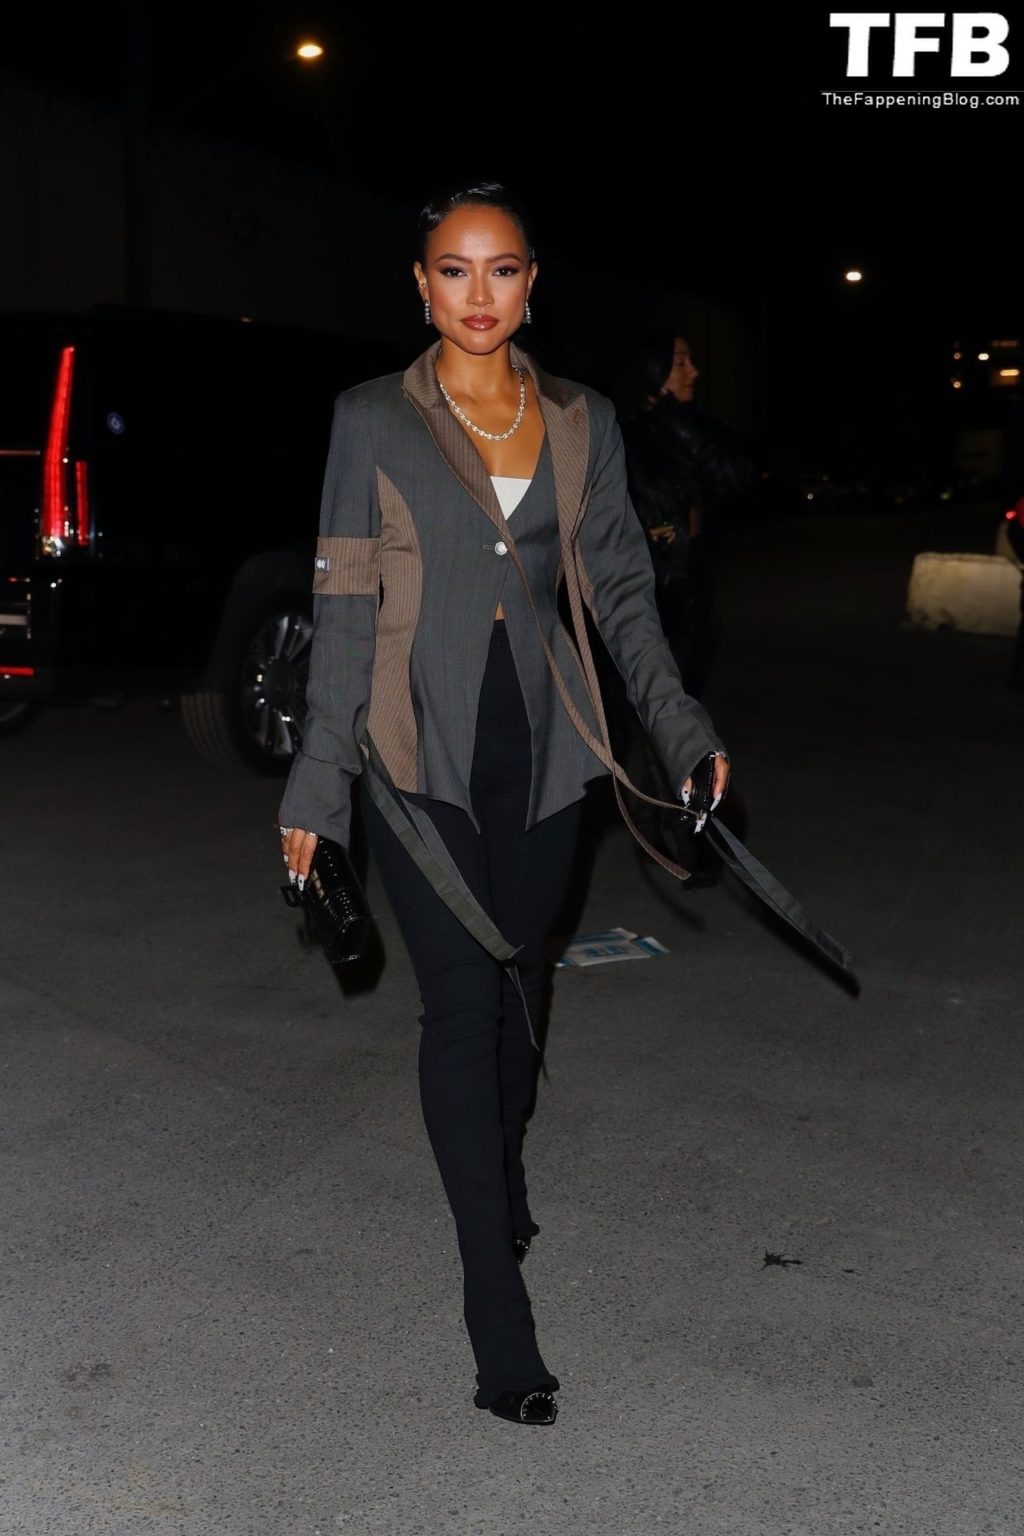 Karrueche Tran Sexy The Fappening Blog 23 1024x1536 - Karrueche Tran Shows Off Her Toned Abs in NYC (26 Photos)